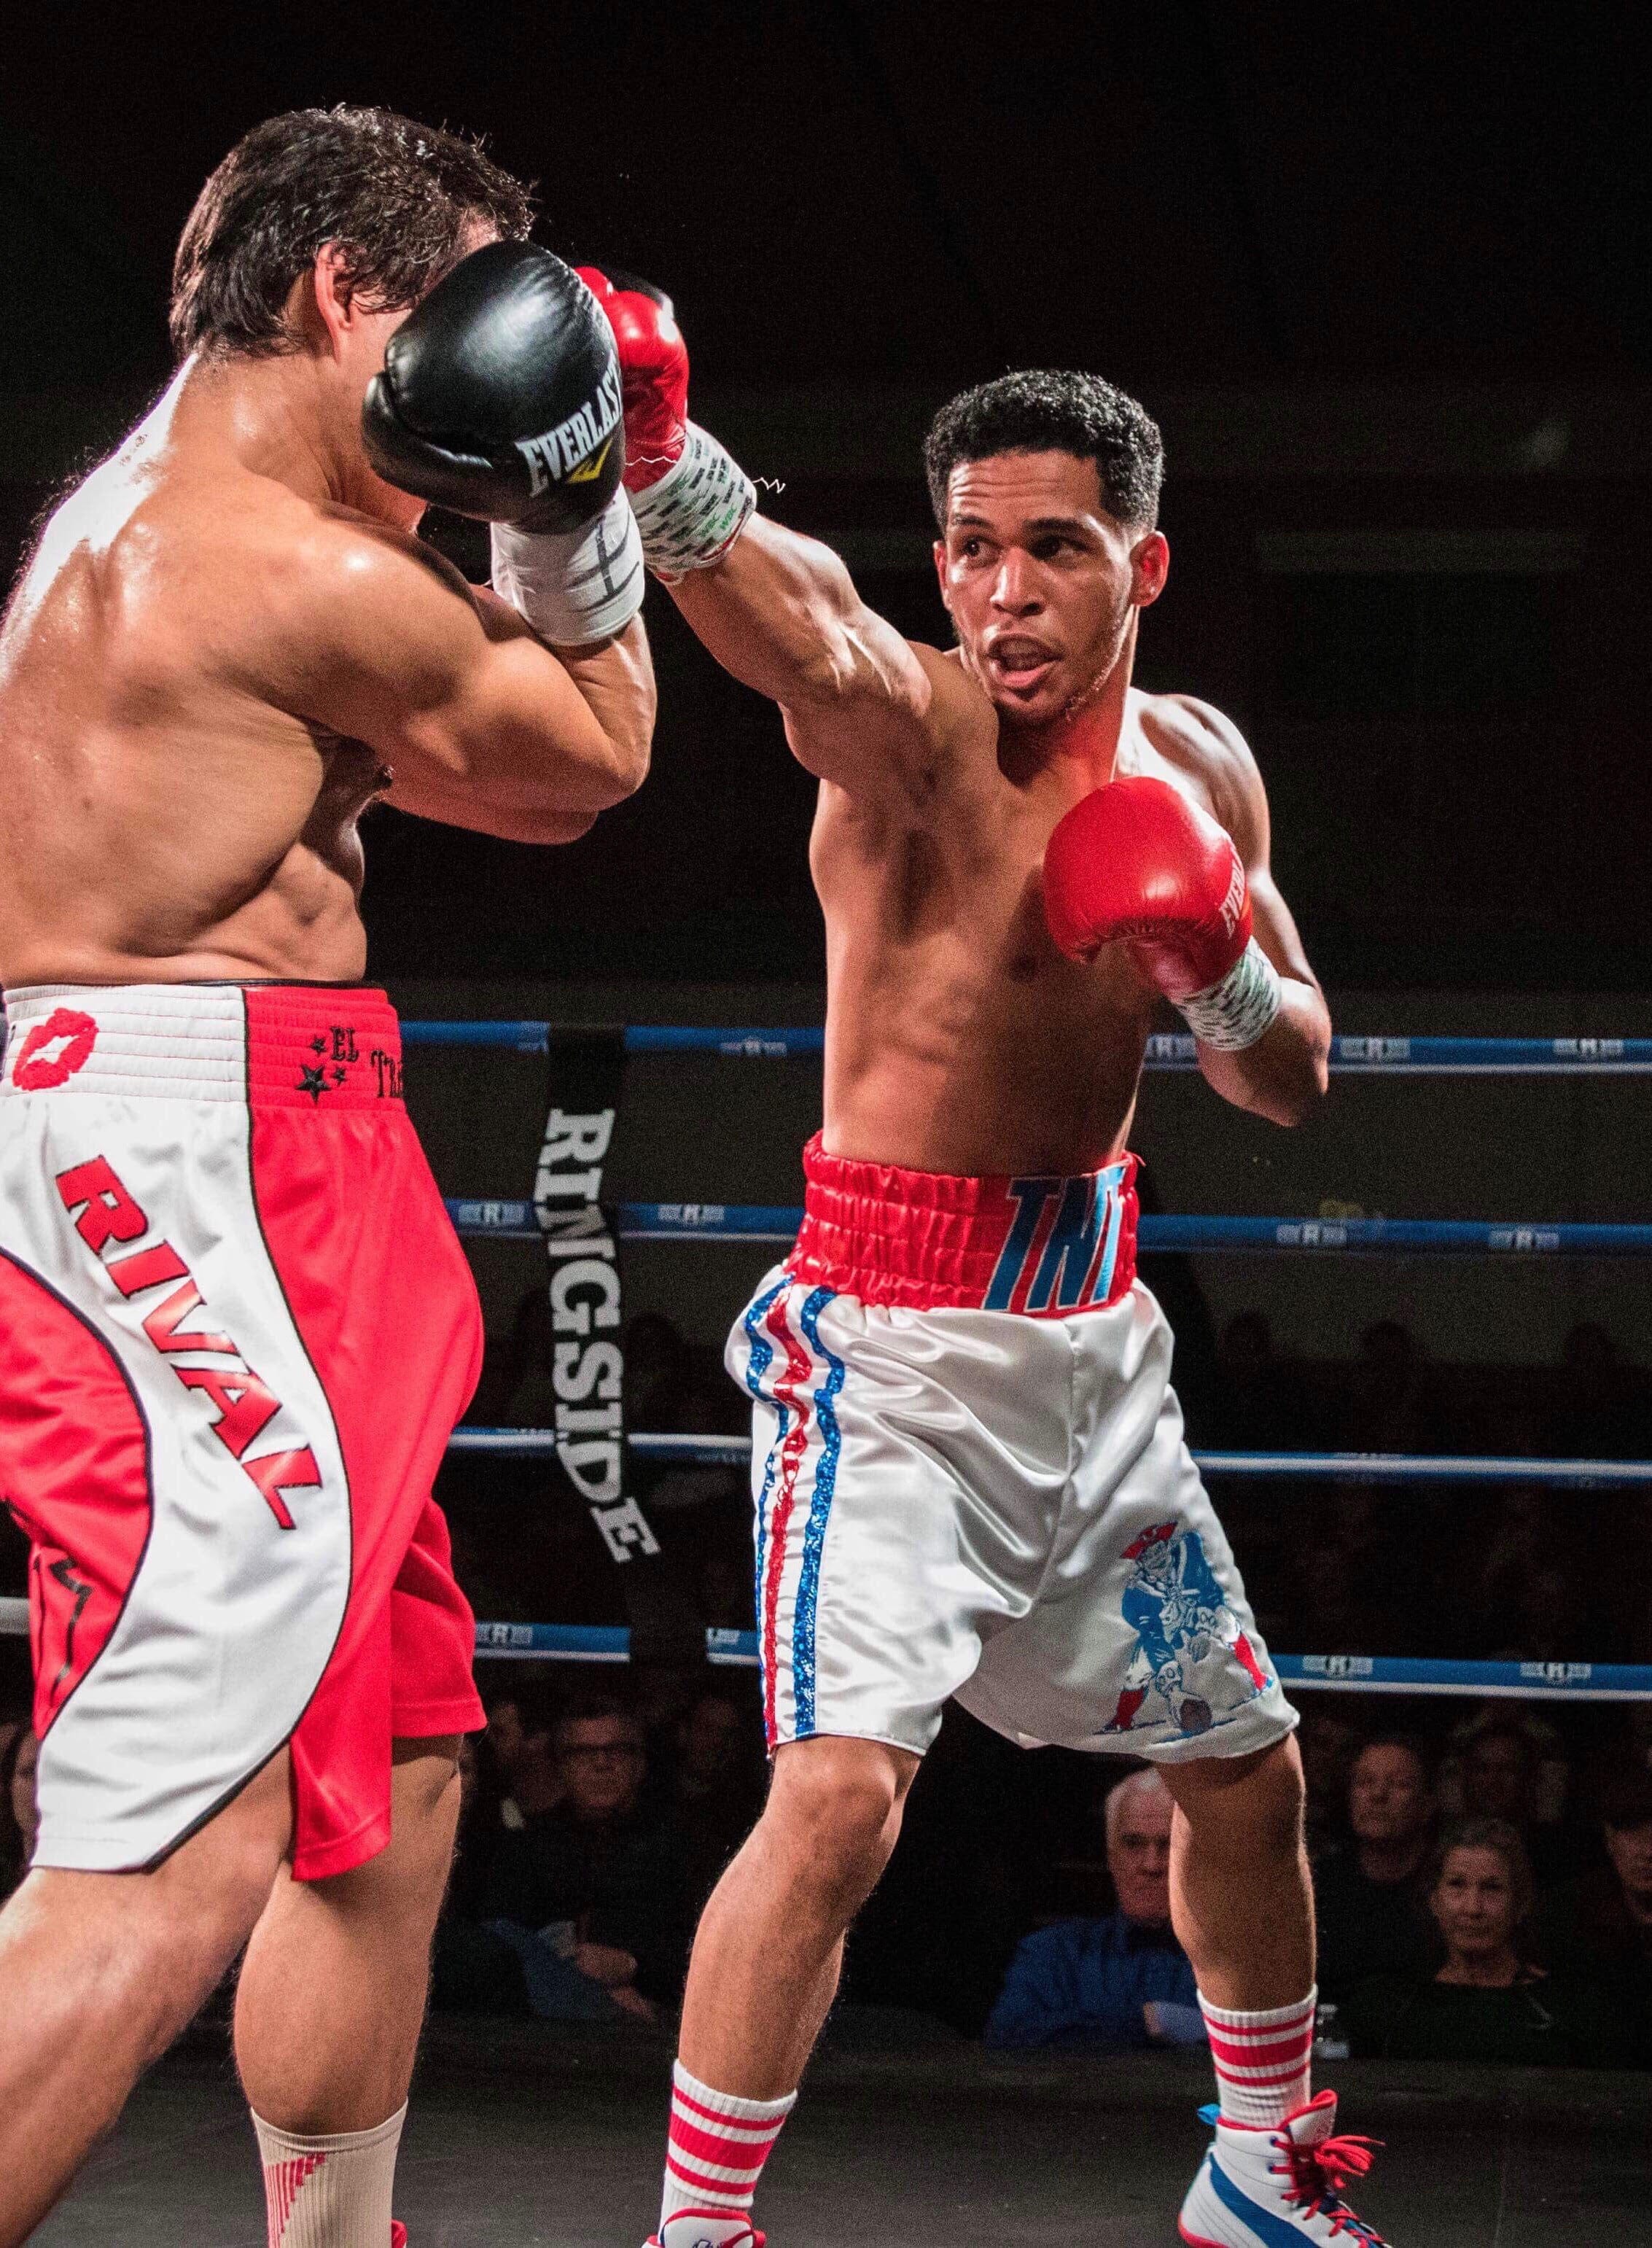 Lynn native Khiry Todd relishes challenge of latest boxing match ...